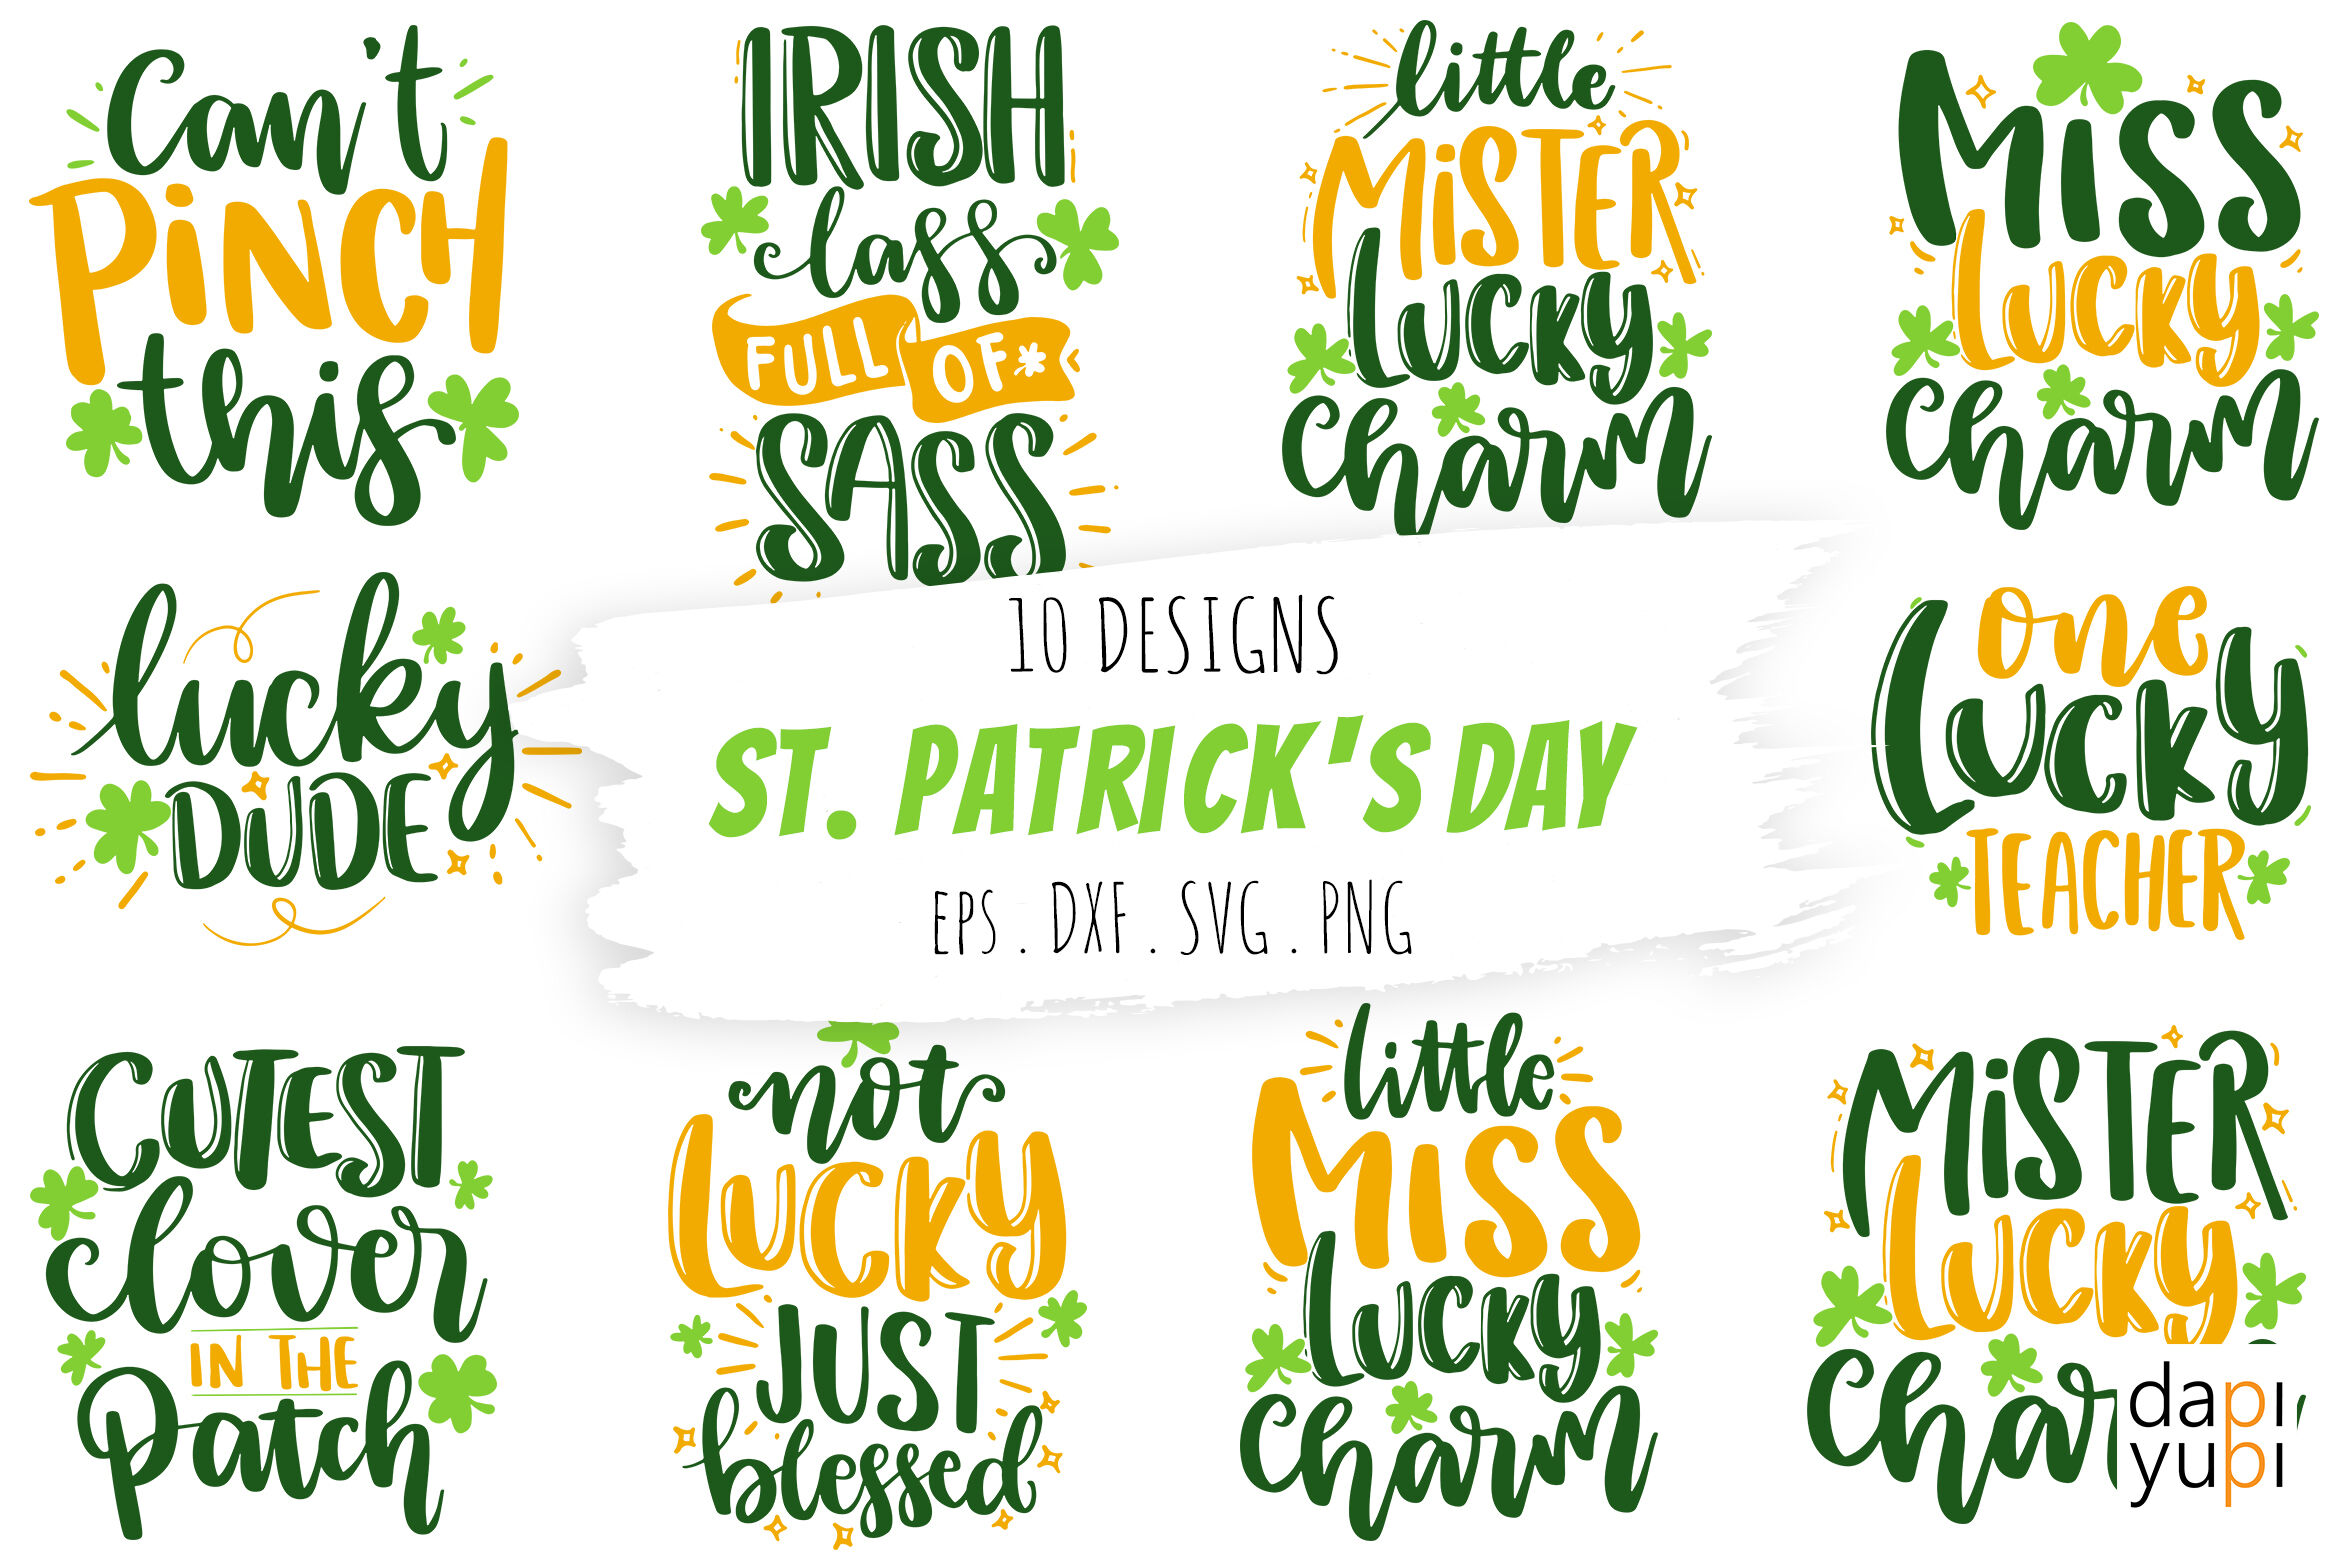 instant download St Patrick/'s Day I Teach the Cutest Clovers in the Patch design file sublimation designs svg png dxf cutI eps